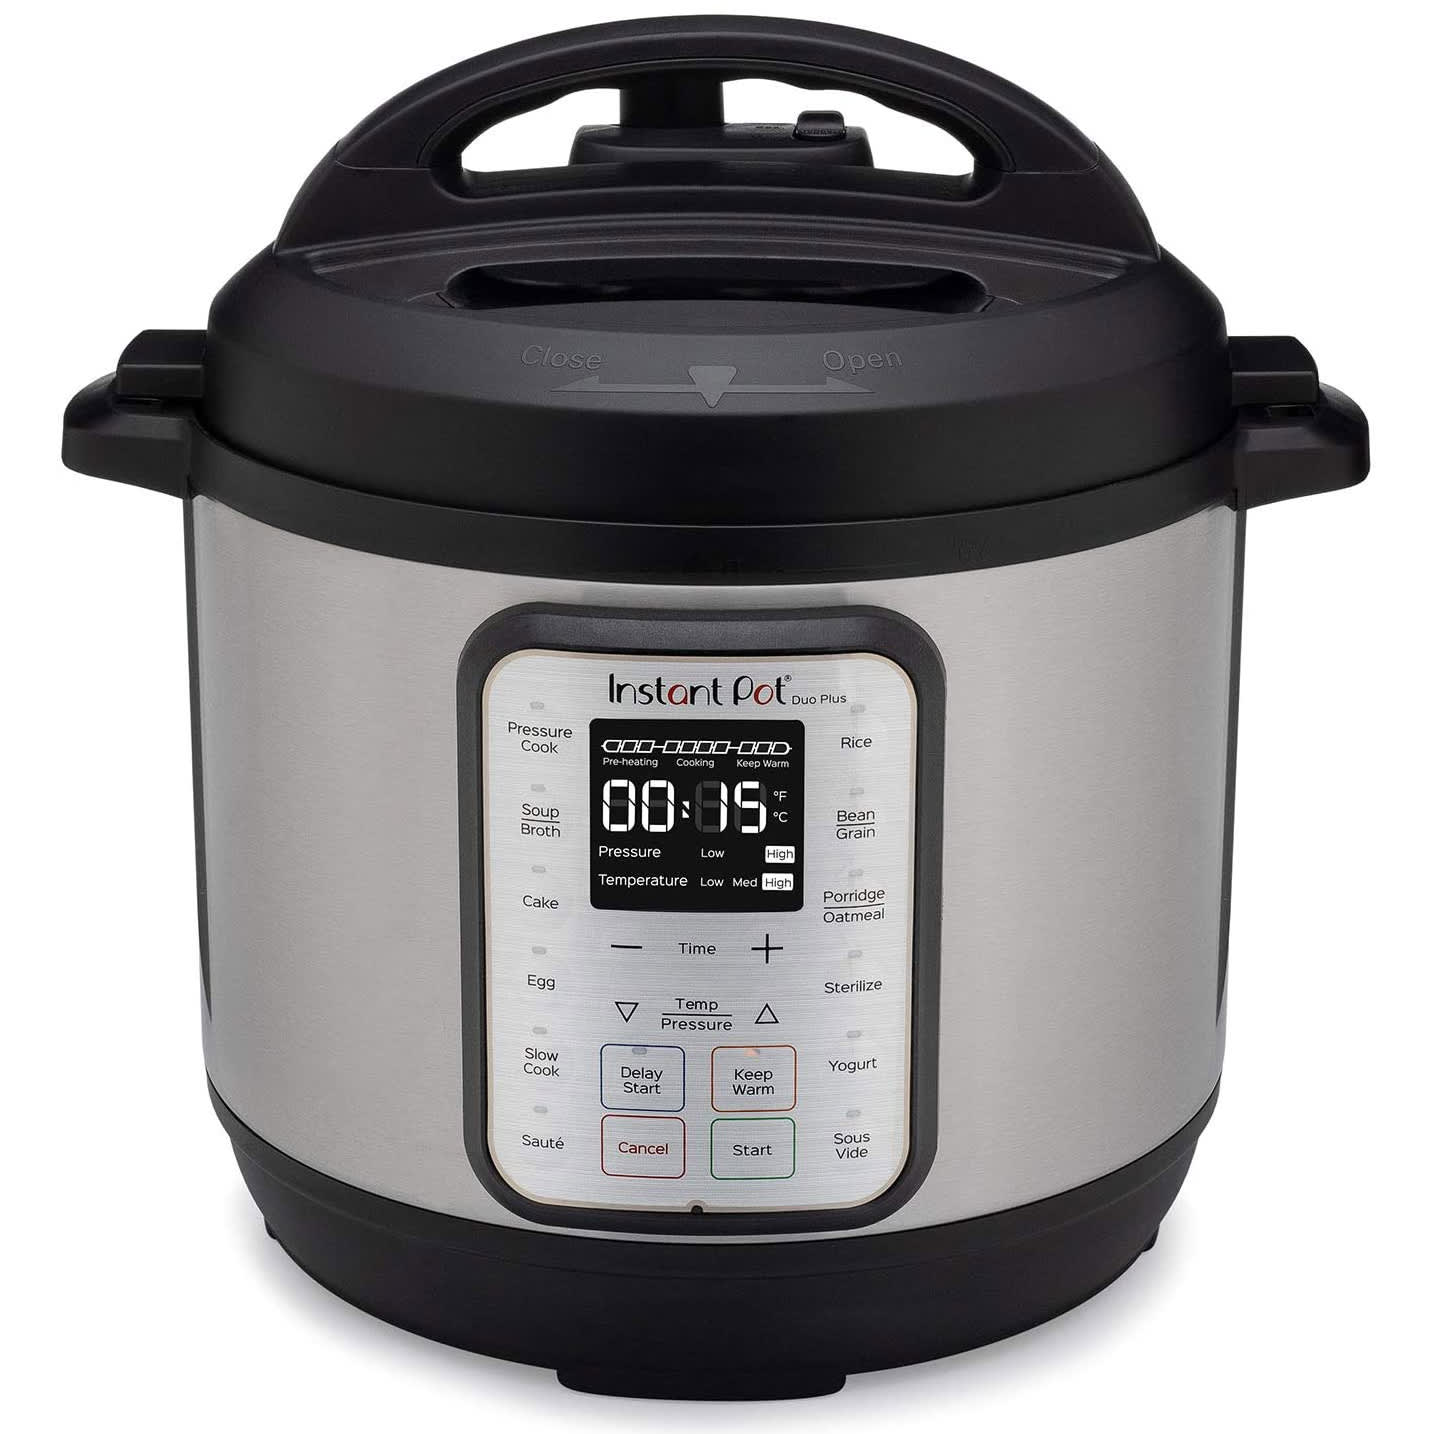 6 unexpected things you can make in your Instant Pot - CNET